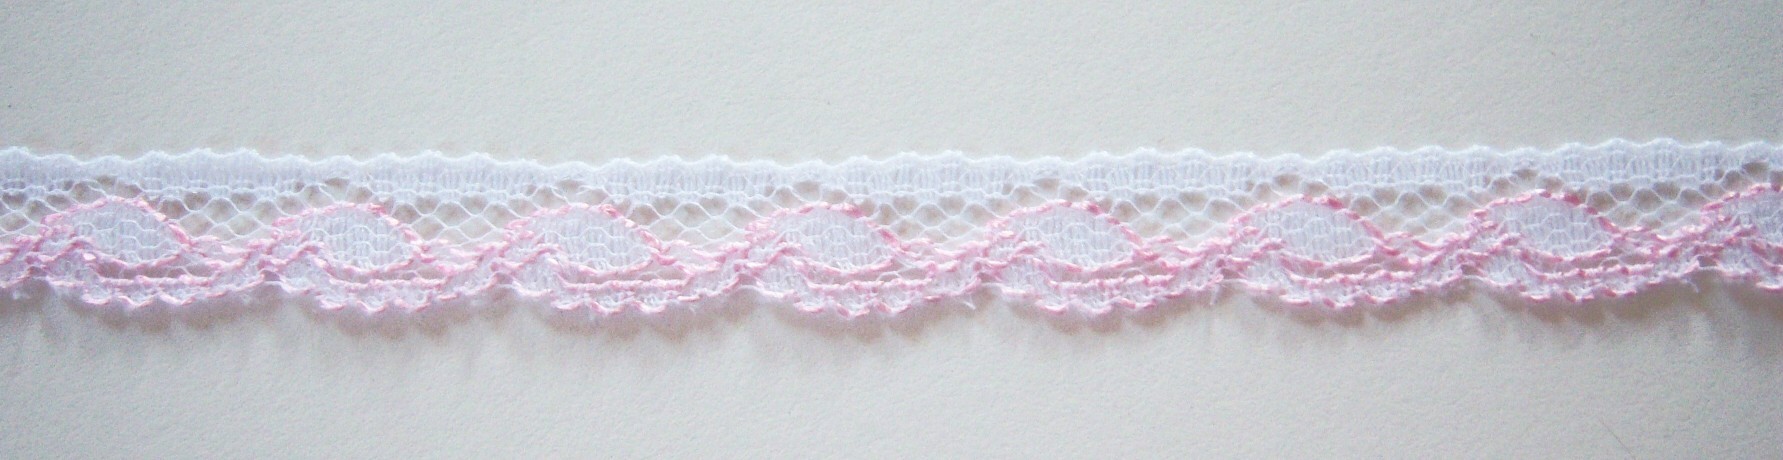 White/Pink 7/16" Lace